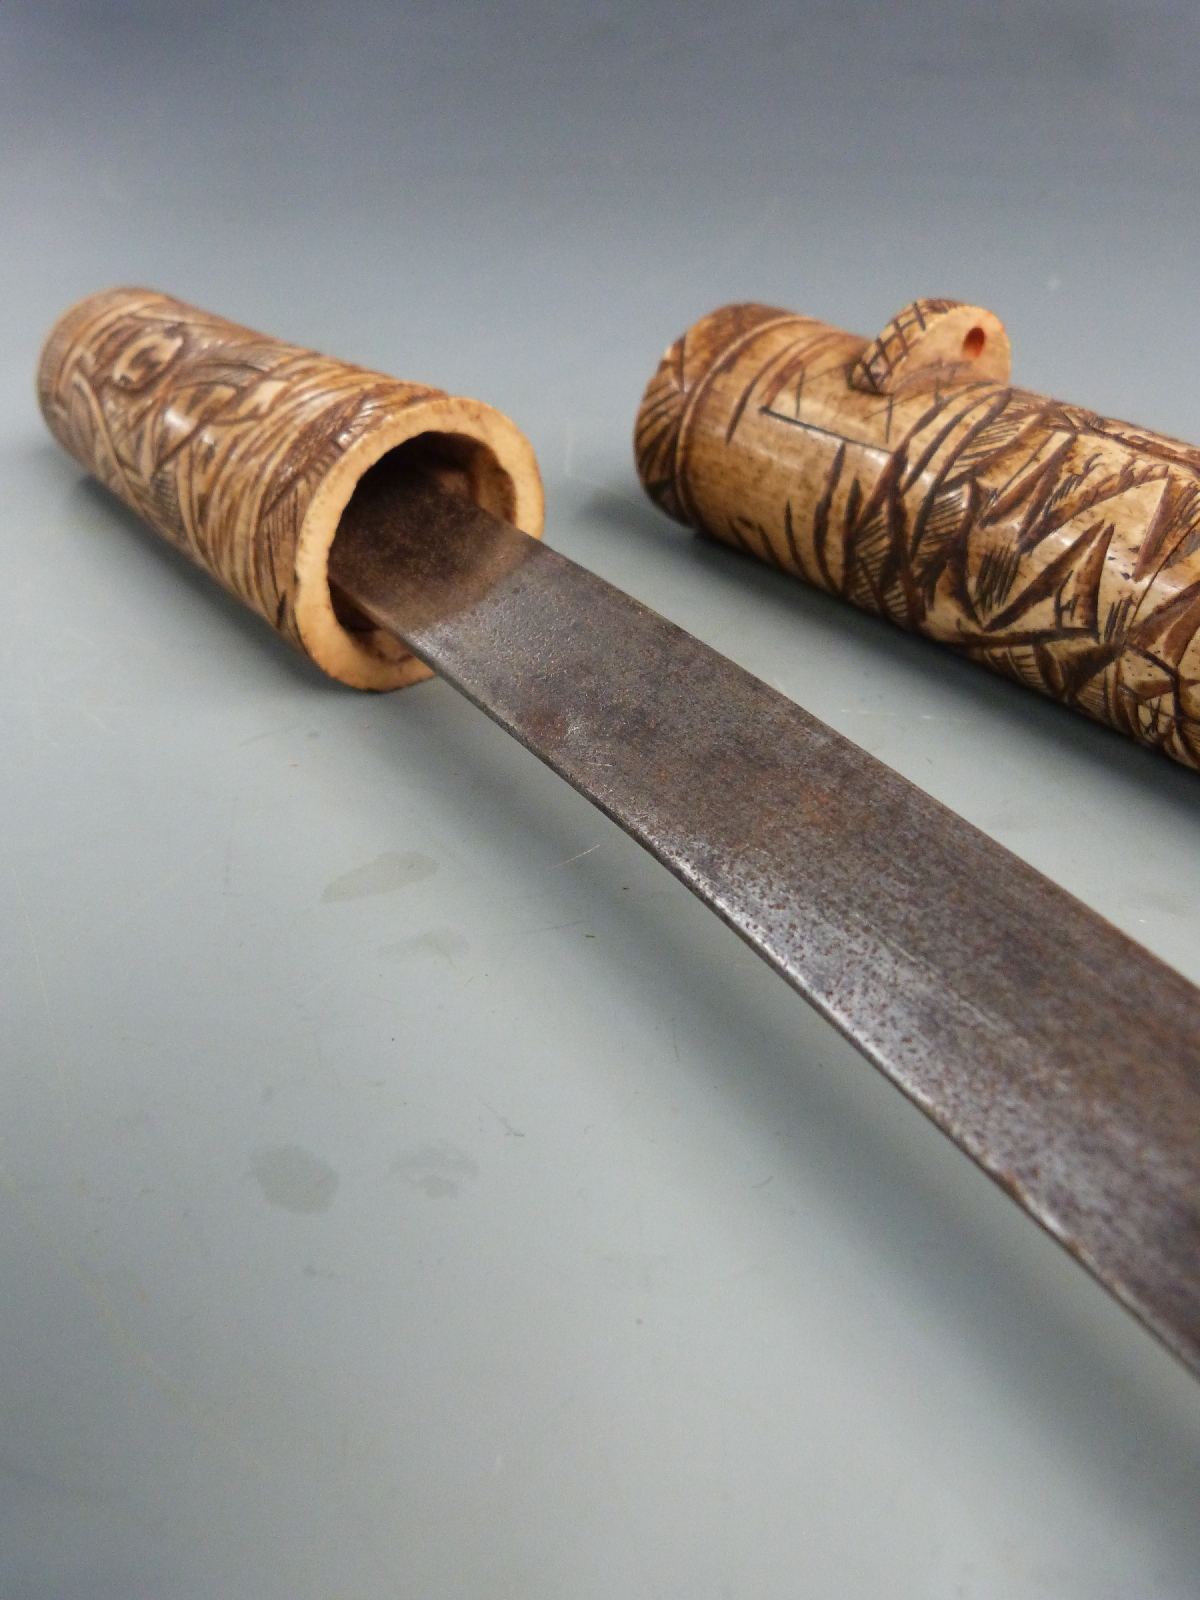 Japanese Tanto dagger with sectional carved bone handle and scabbard depicting figures, blade length - Image 4 of 5